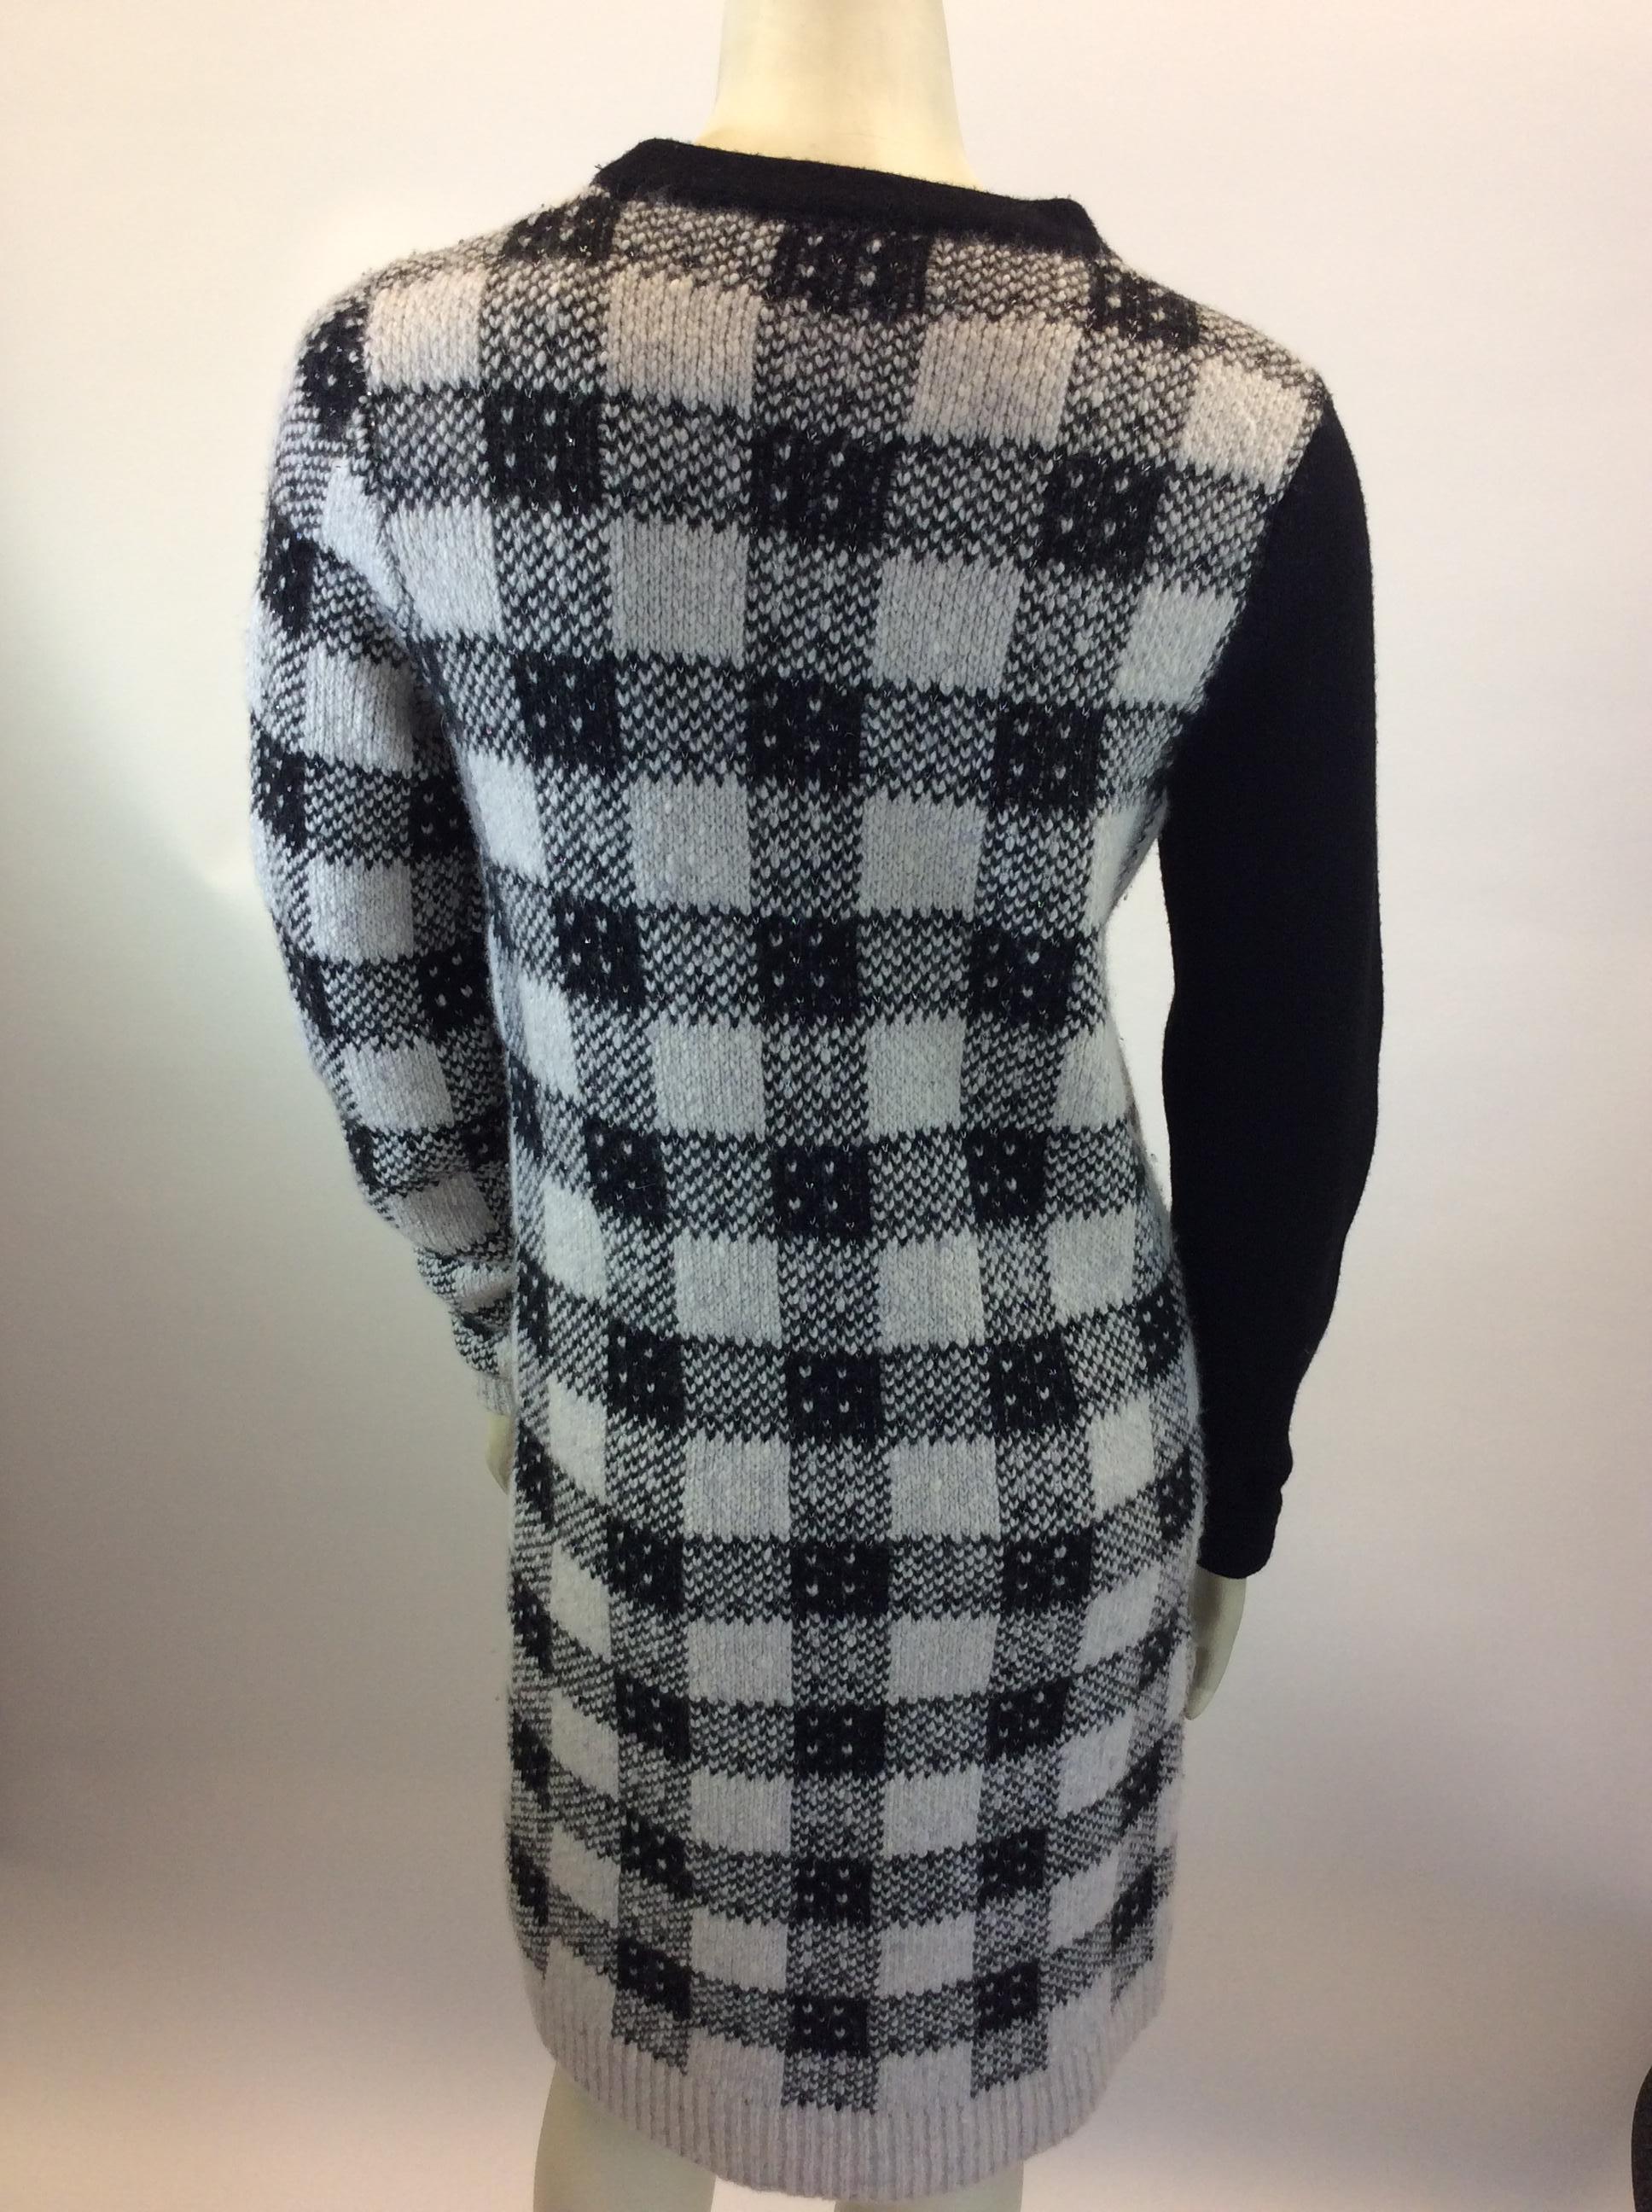 Phillip Lim White and Black Sweater Dress In Good Condition For Sale In Narberth, PA